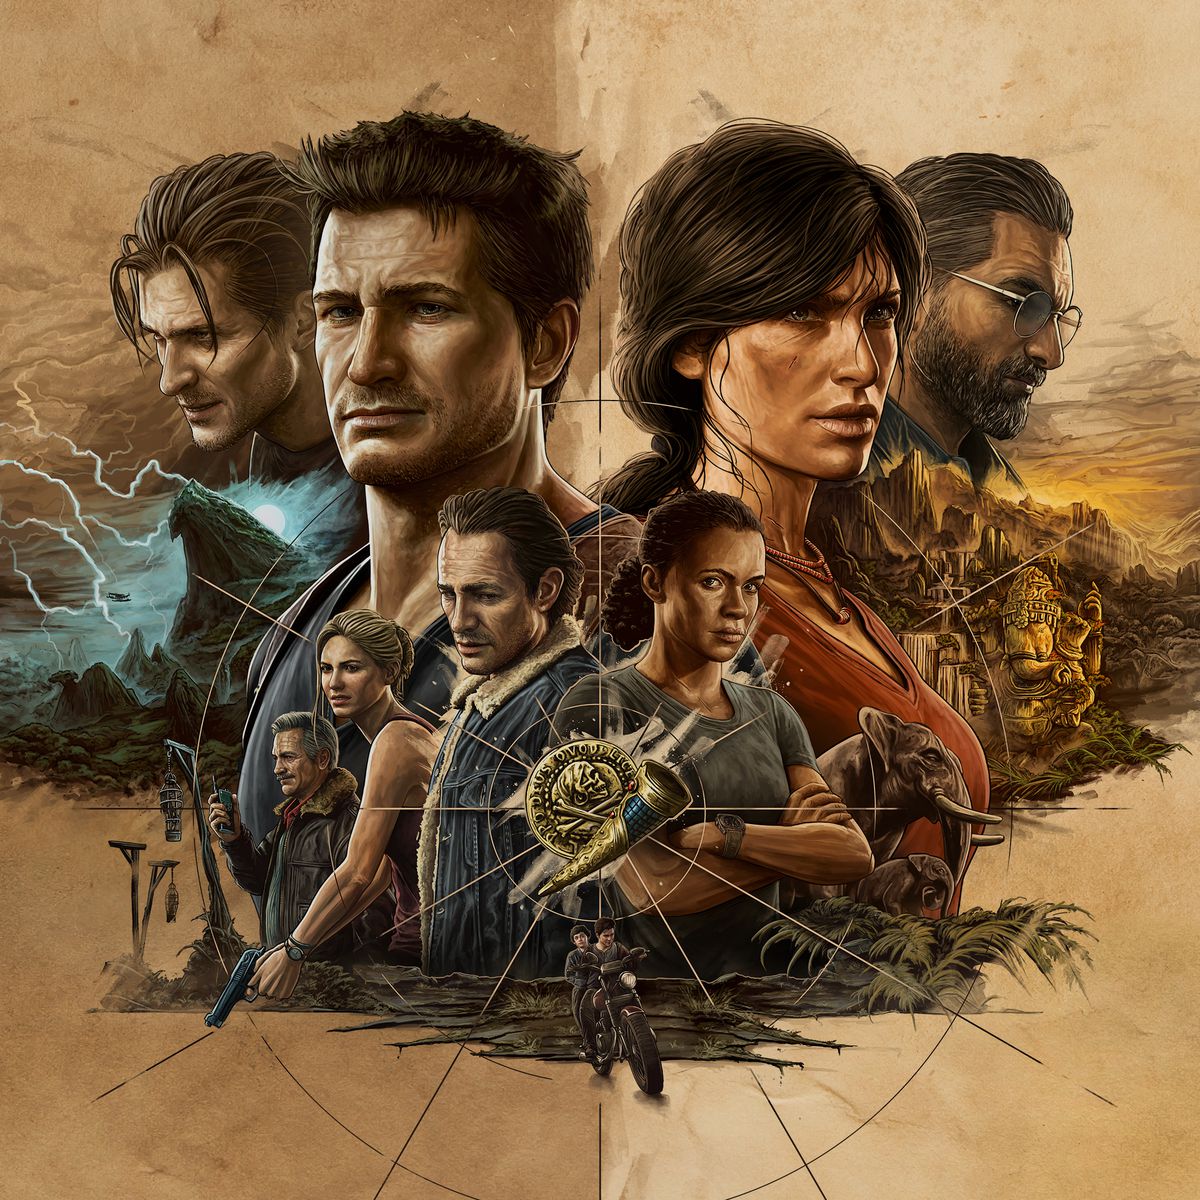 key art for Uncharted: Legacy of Thieves Collection, featuring movie poster-style artwork of characters from Uncharted 4: A Thief’s End on the left half and from Uncharted: The Lost Legacy on the right half